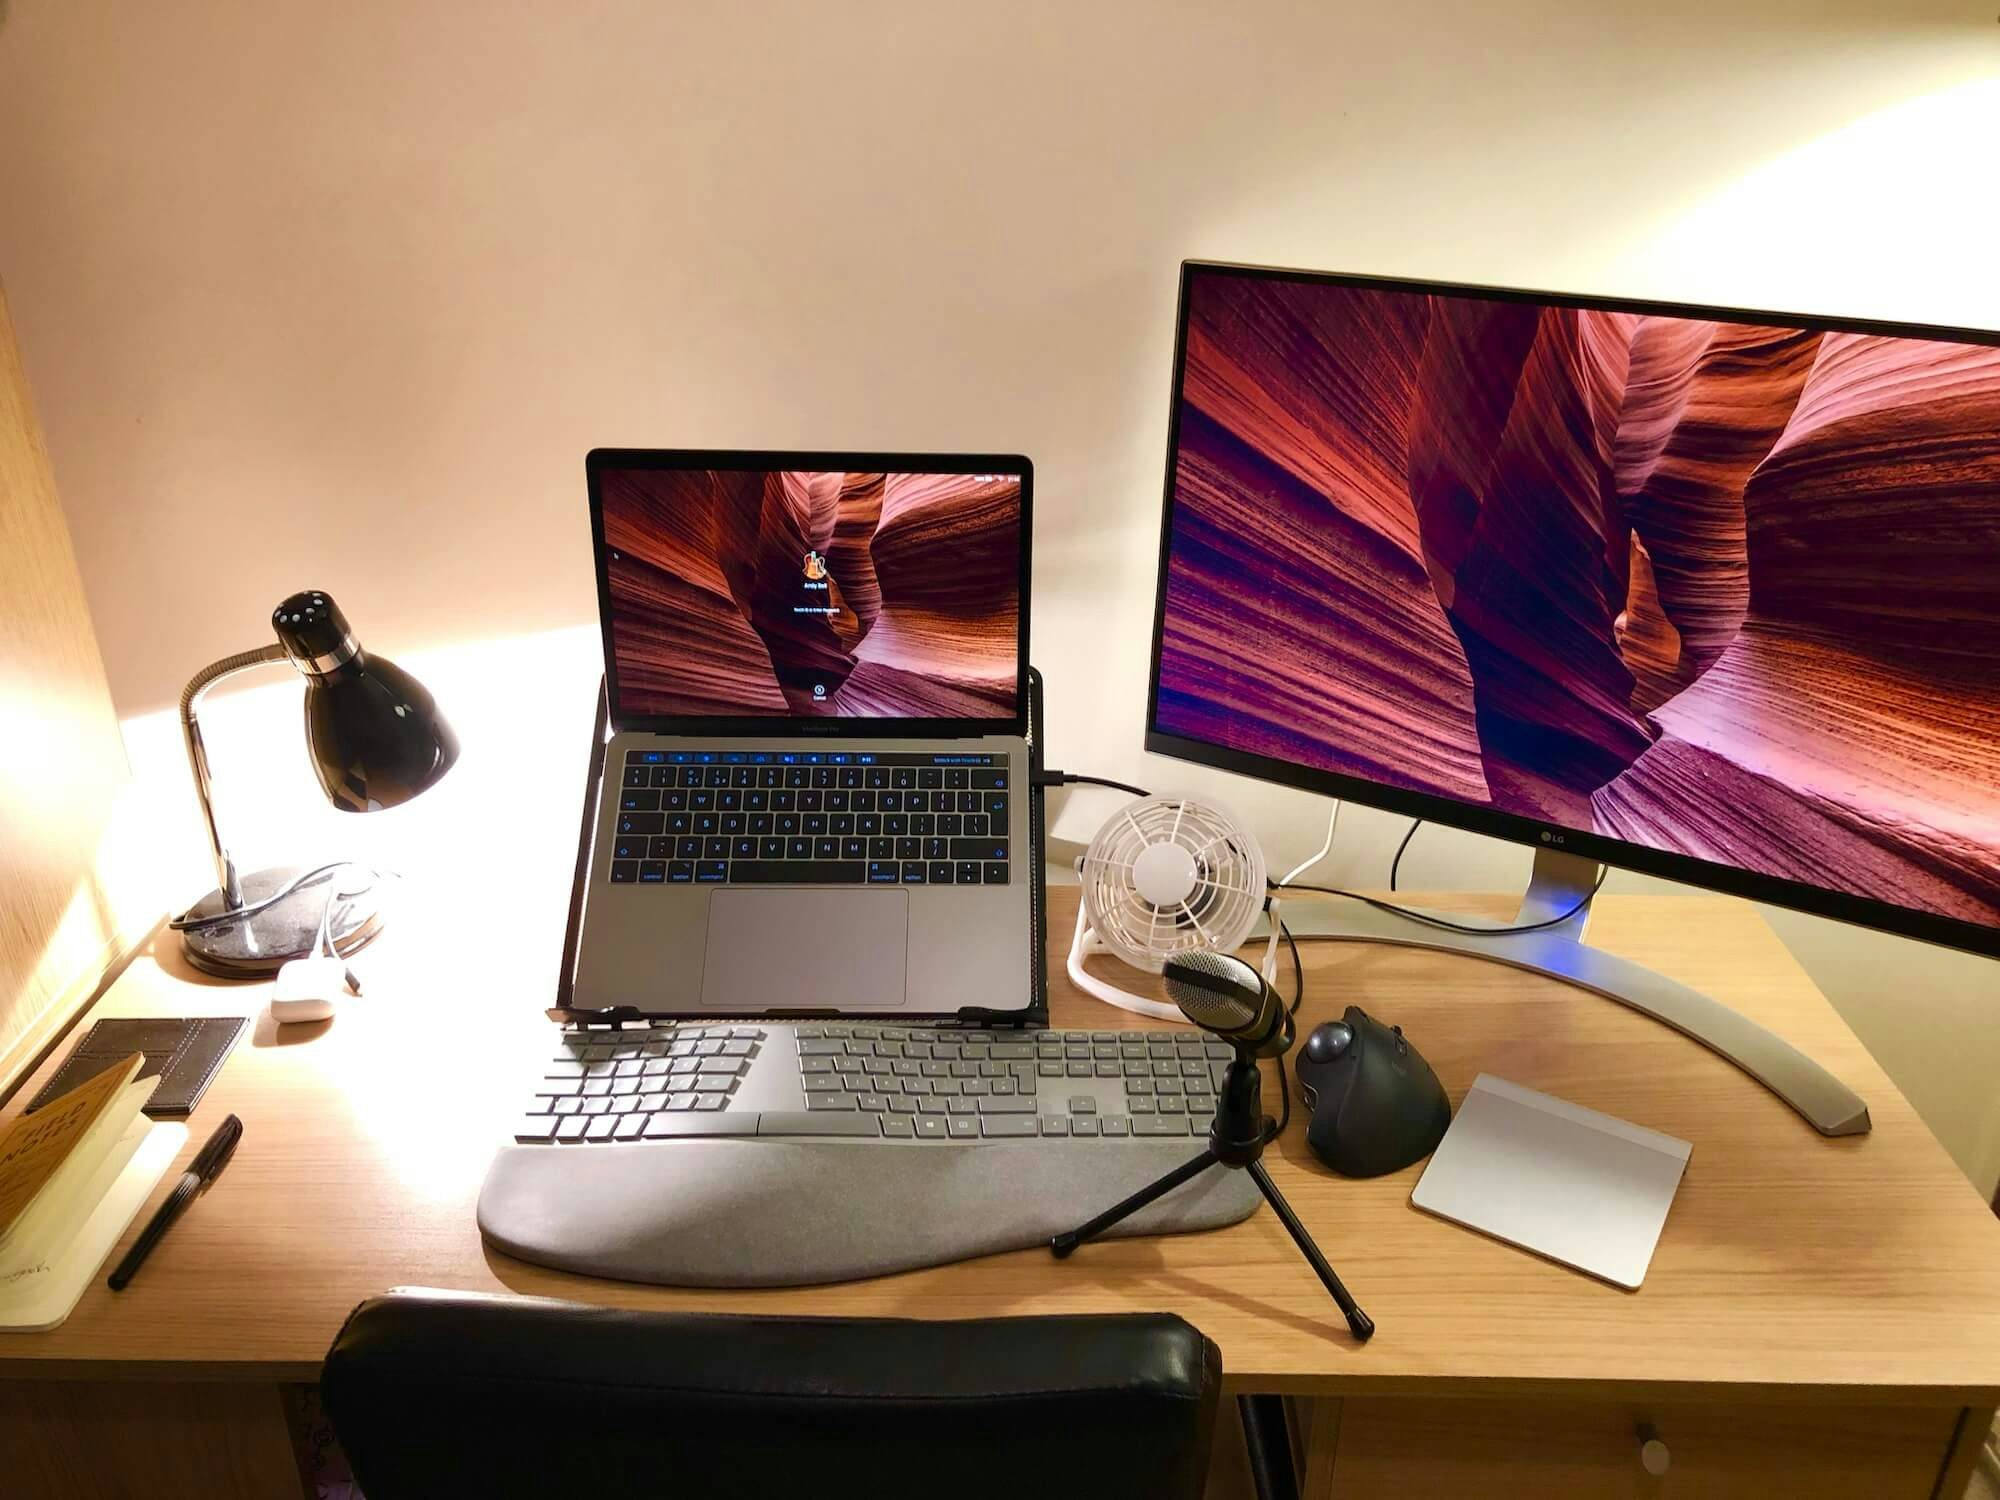 An office desk with a mounted MacBook Pro, an external display and various accessories